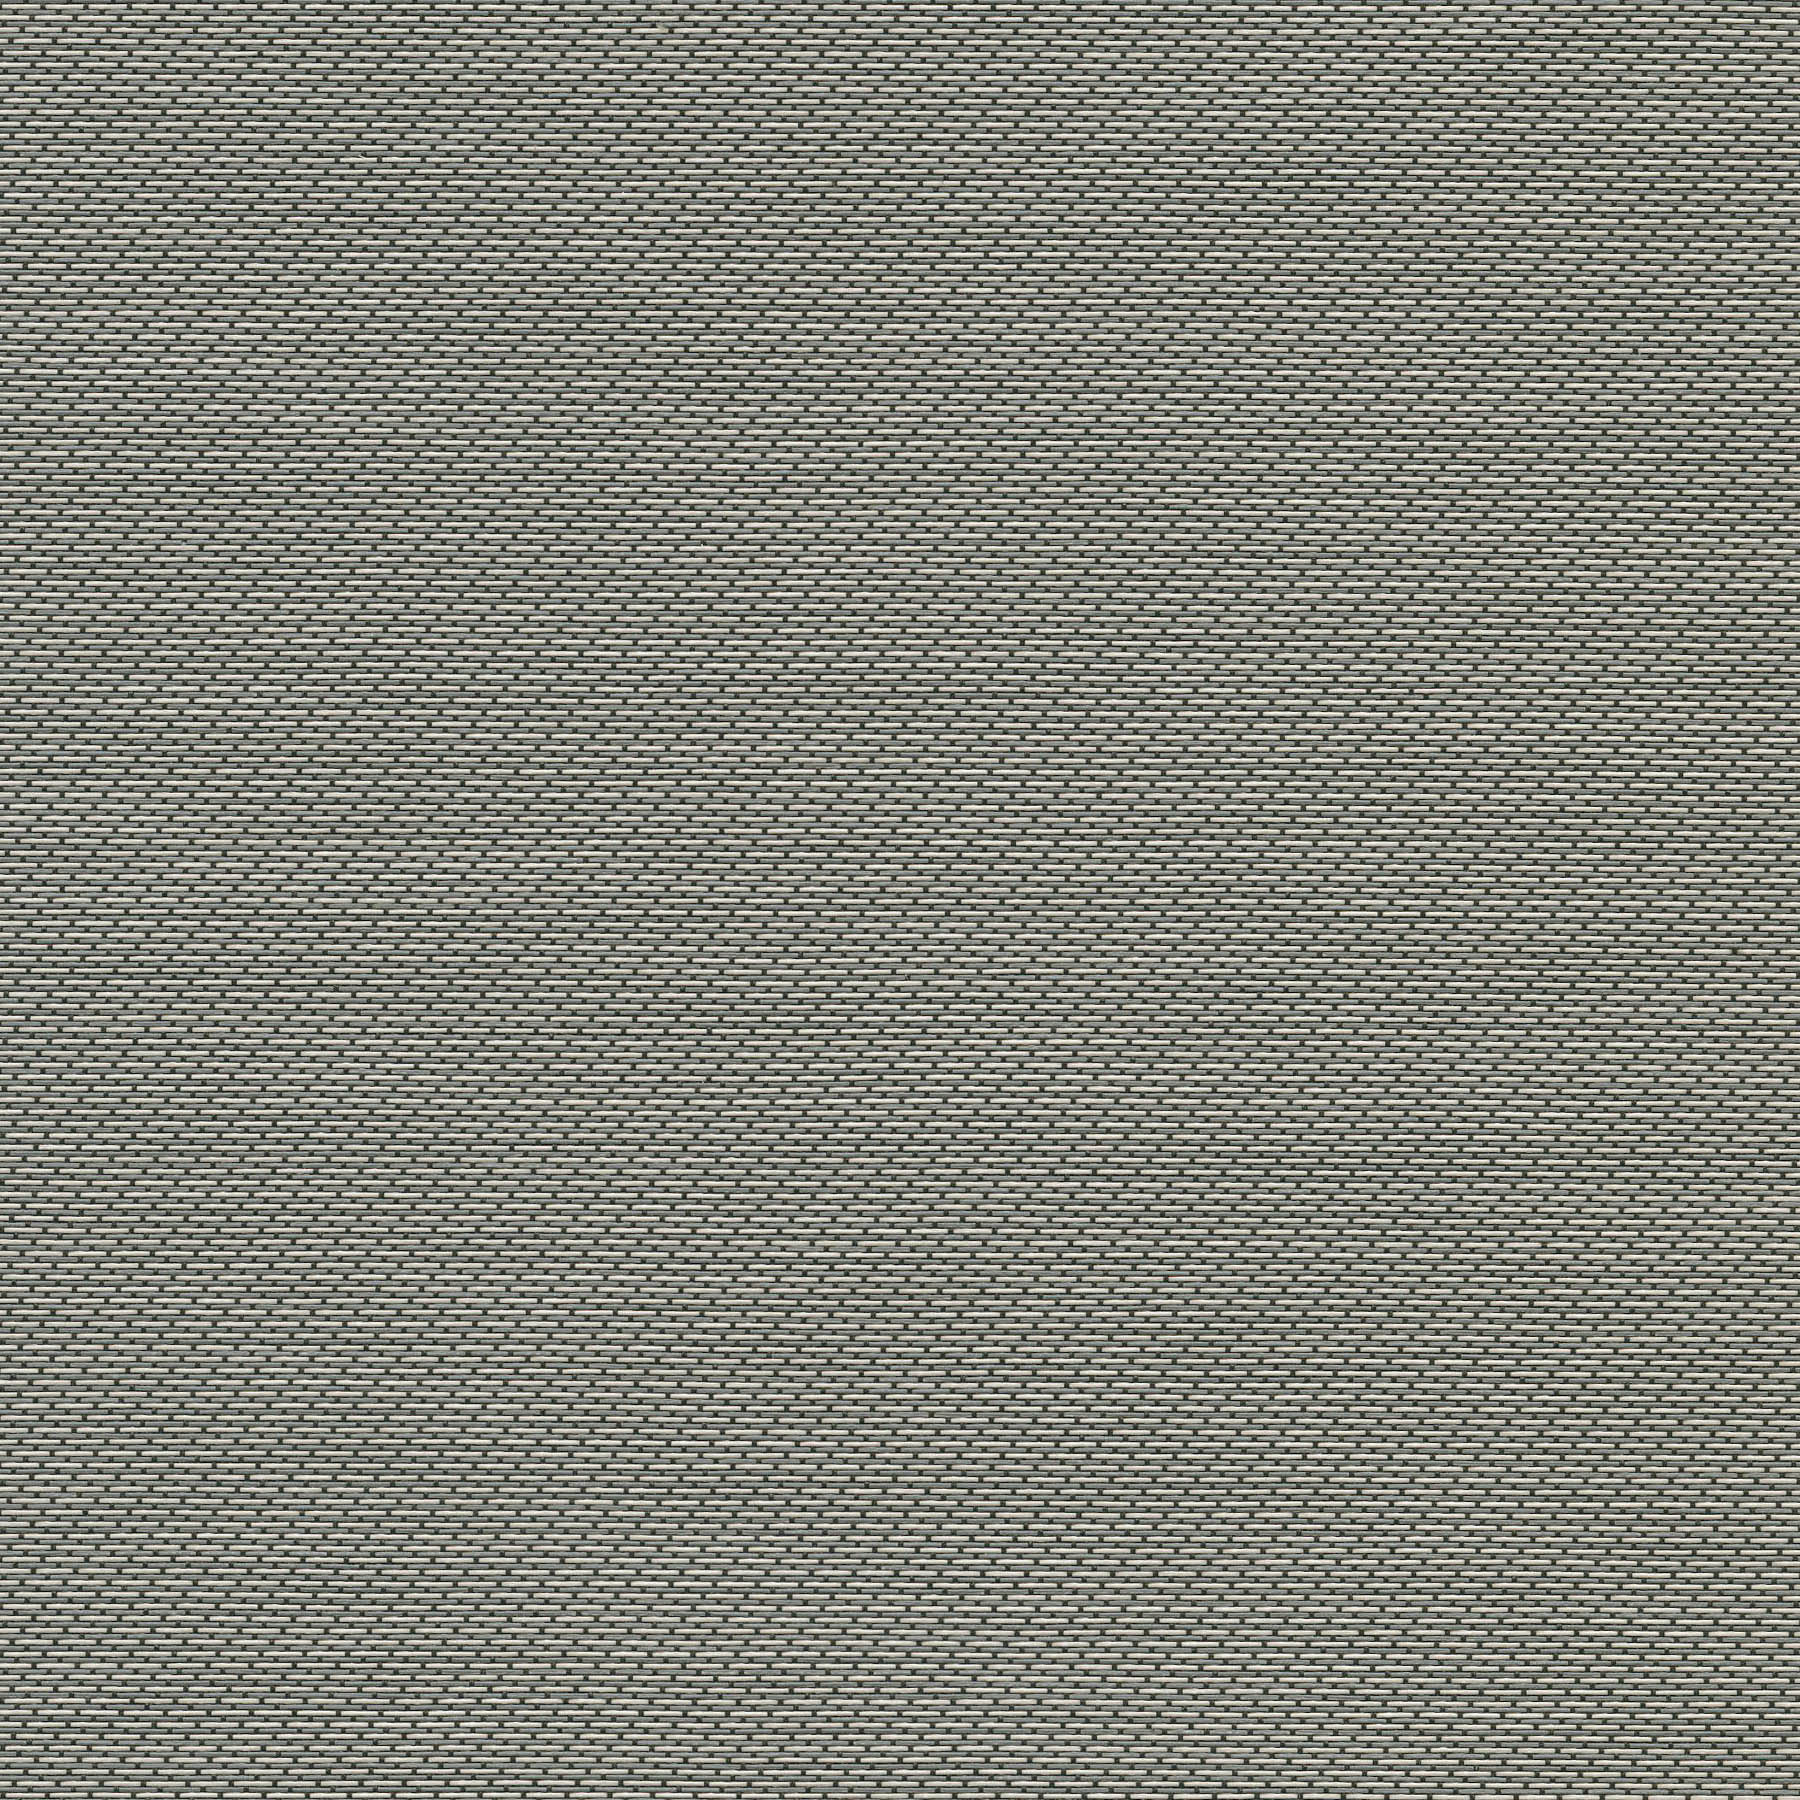 Altex - Fabric - SHEERWEAVE 2701 - Taupe/Charcoal - 1353